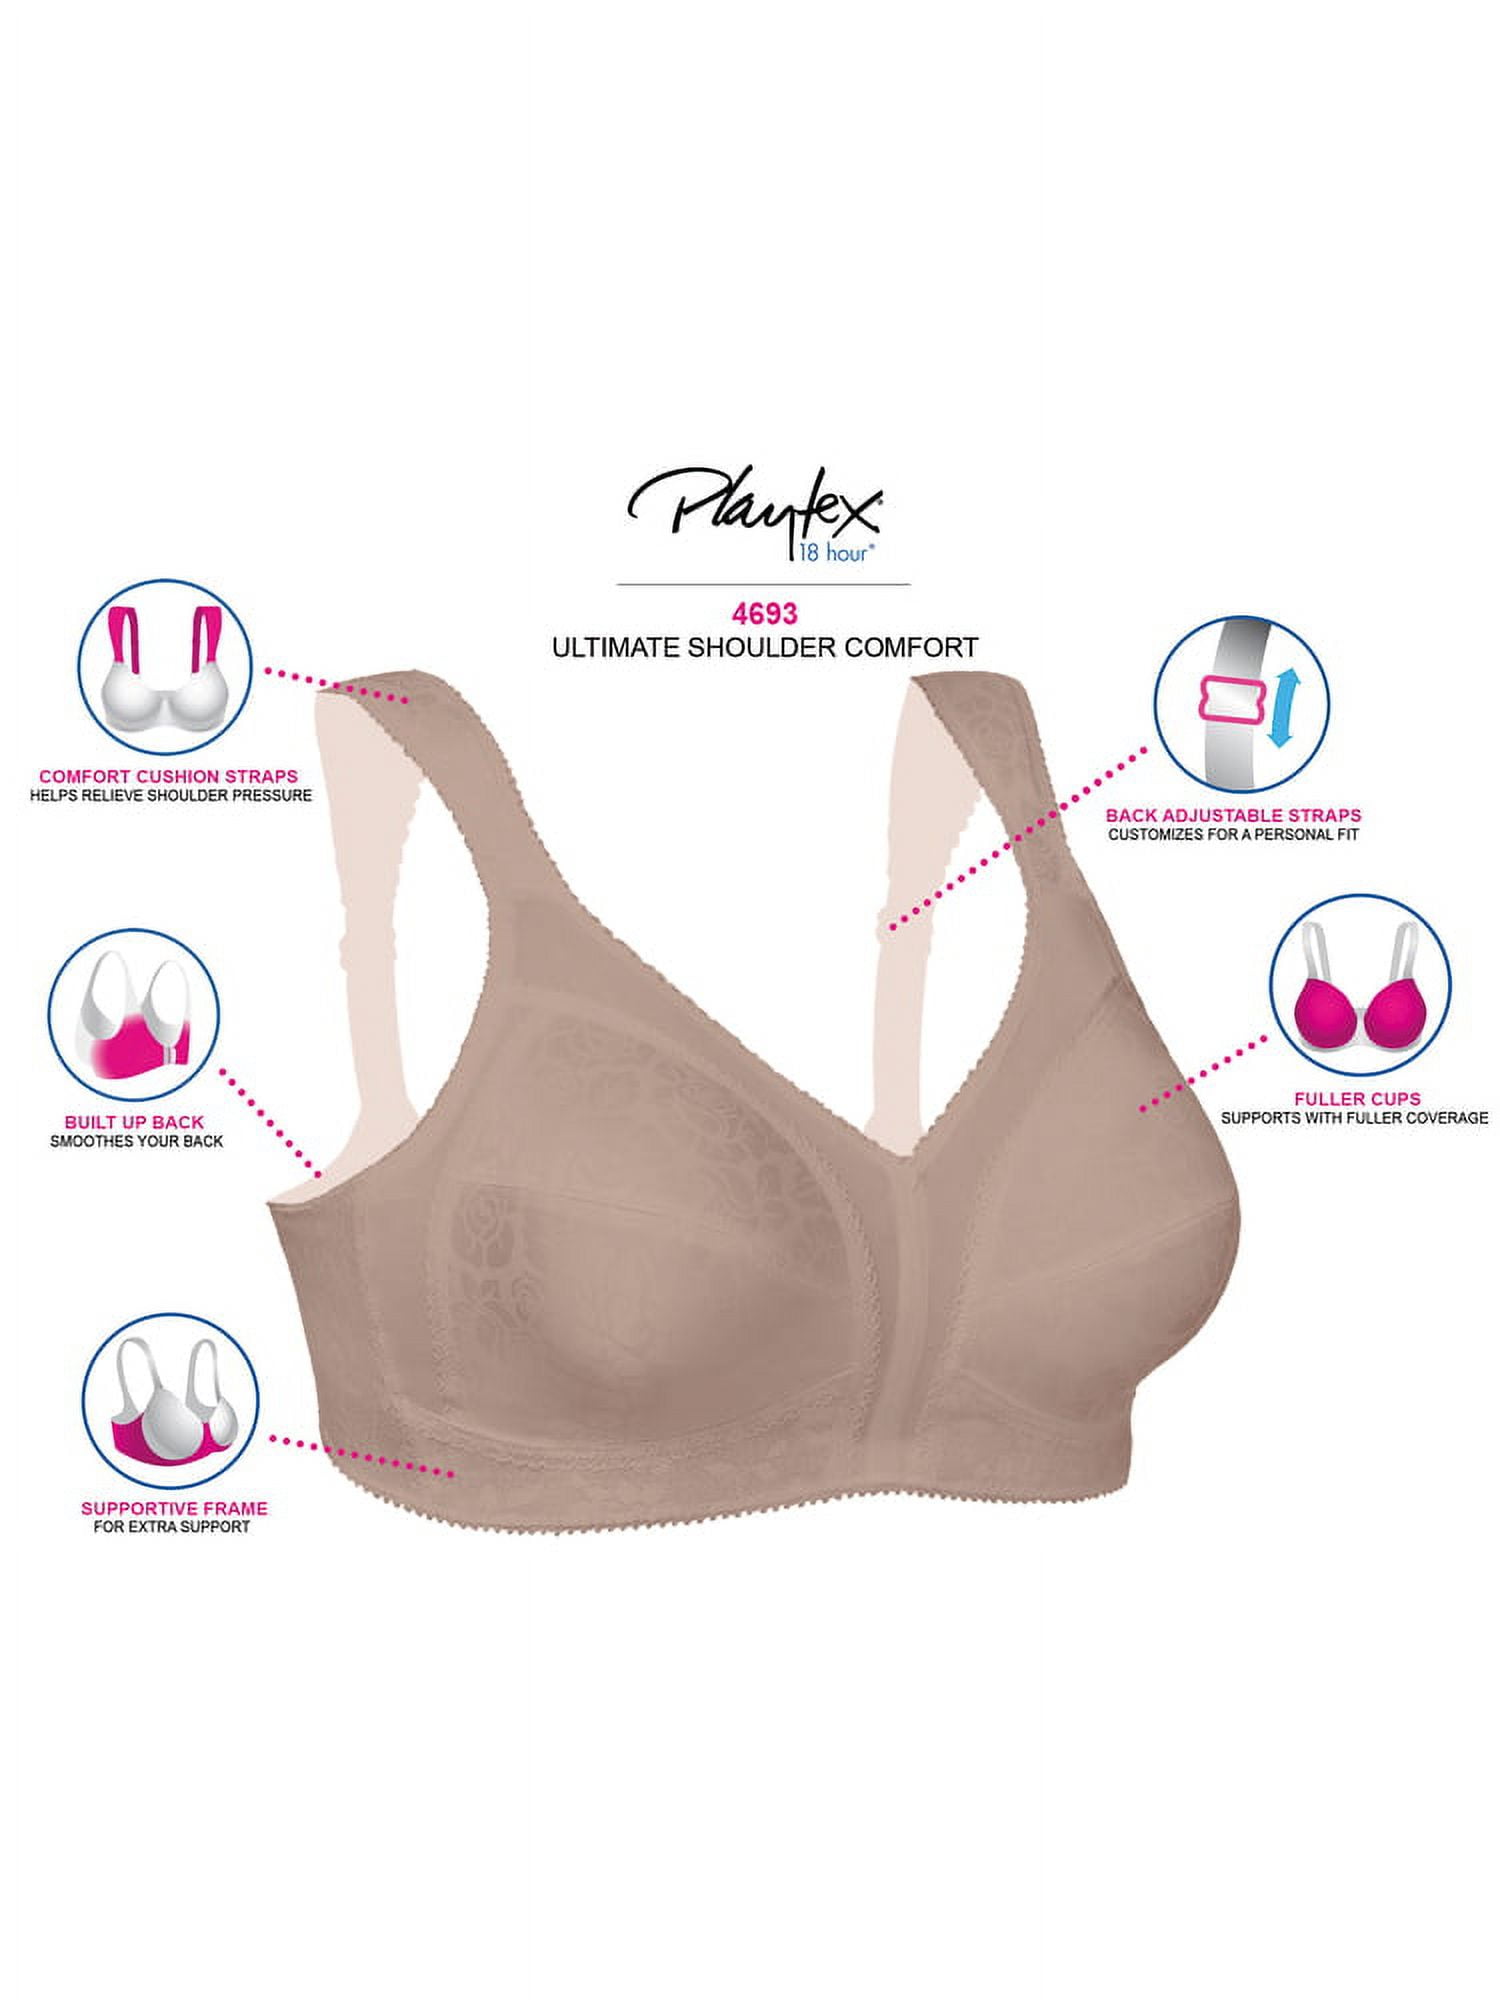 Playtex 18 Hour Bra Ultimate Shoulder Comfort Lace Wire Free 46DD RN15763